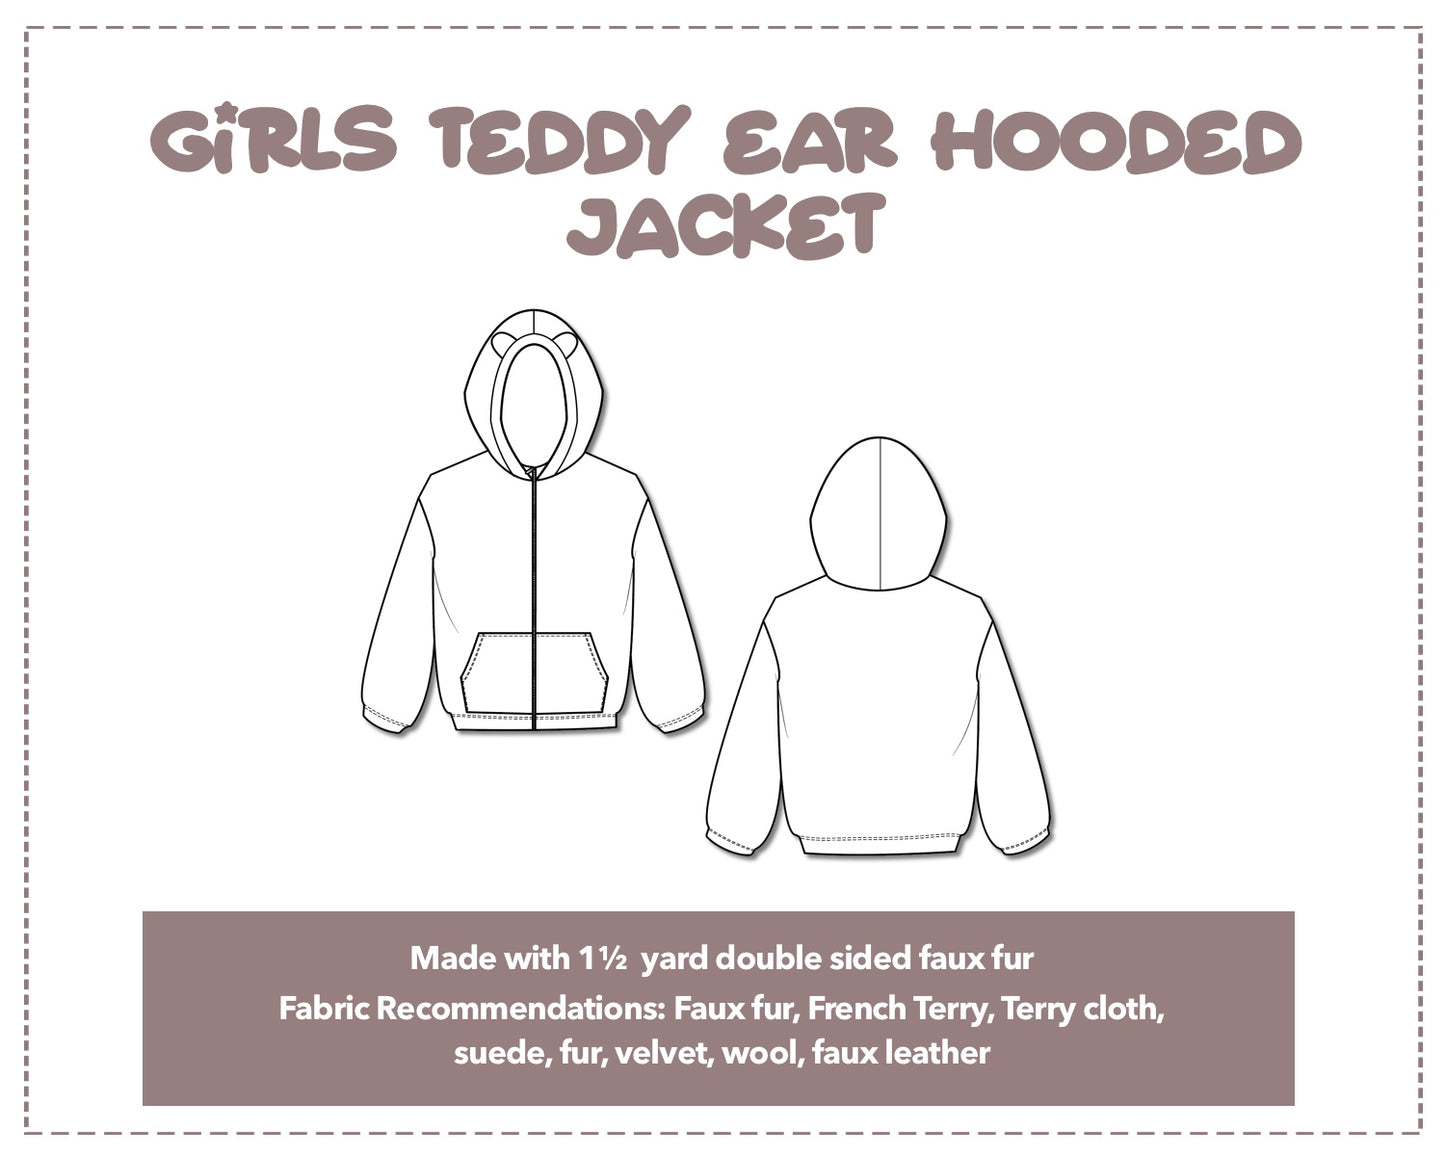 Illustration and detailed description for Girls Teddy Ear Hooded Jacket sewing pattern.